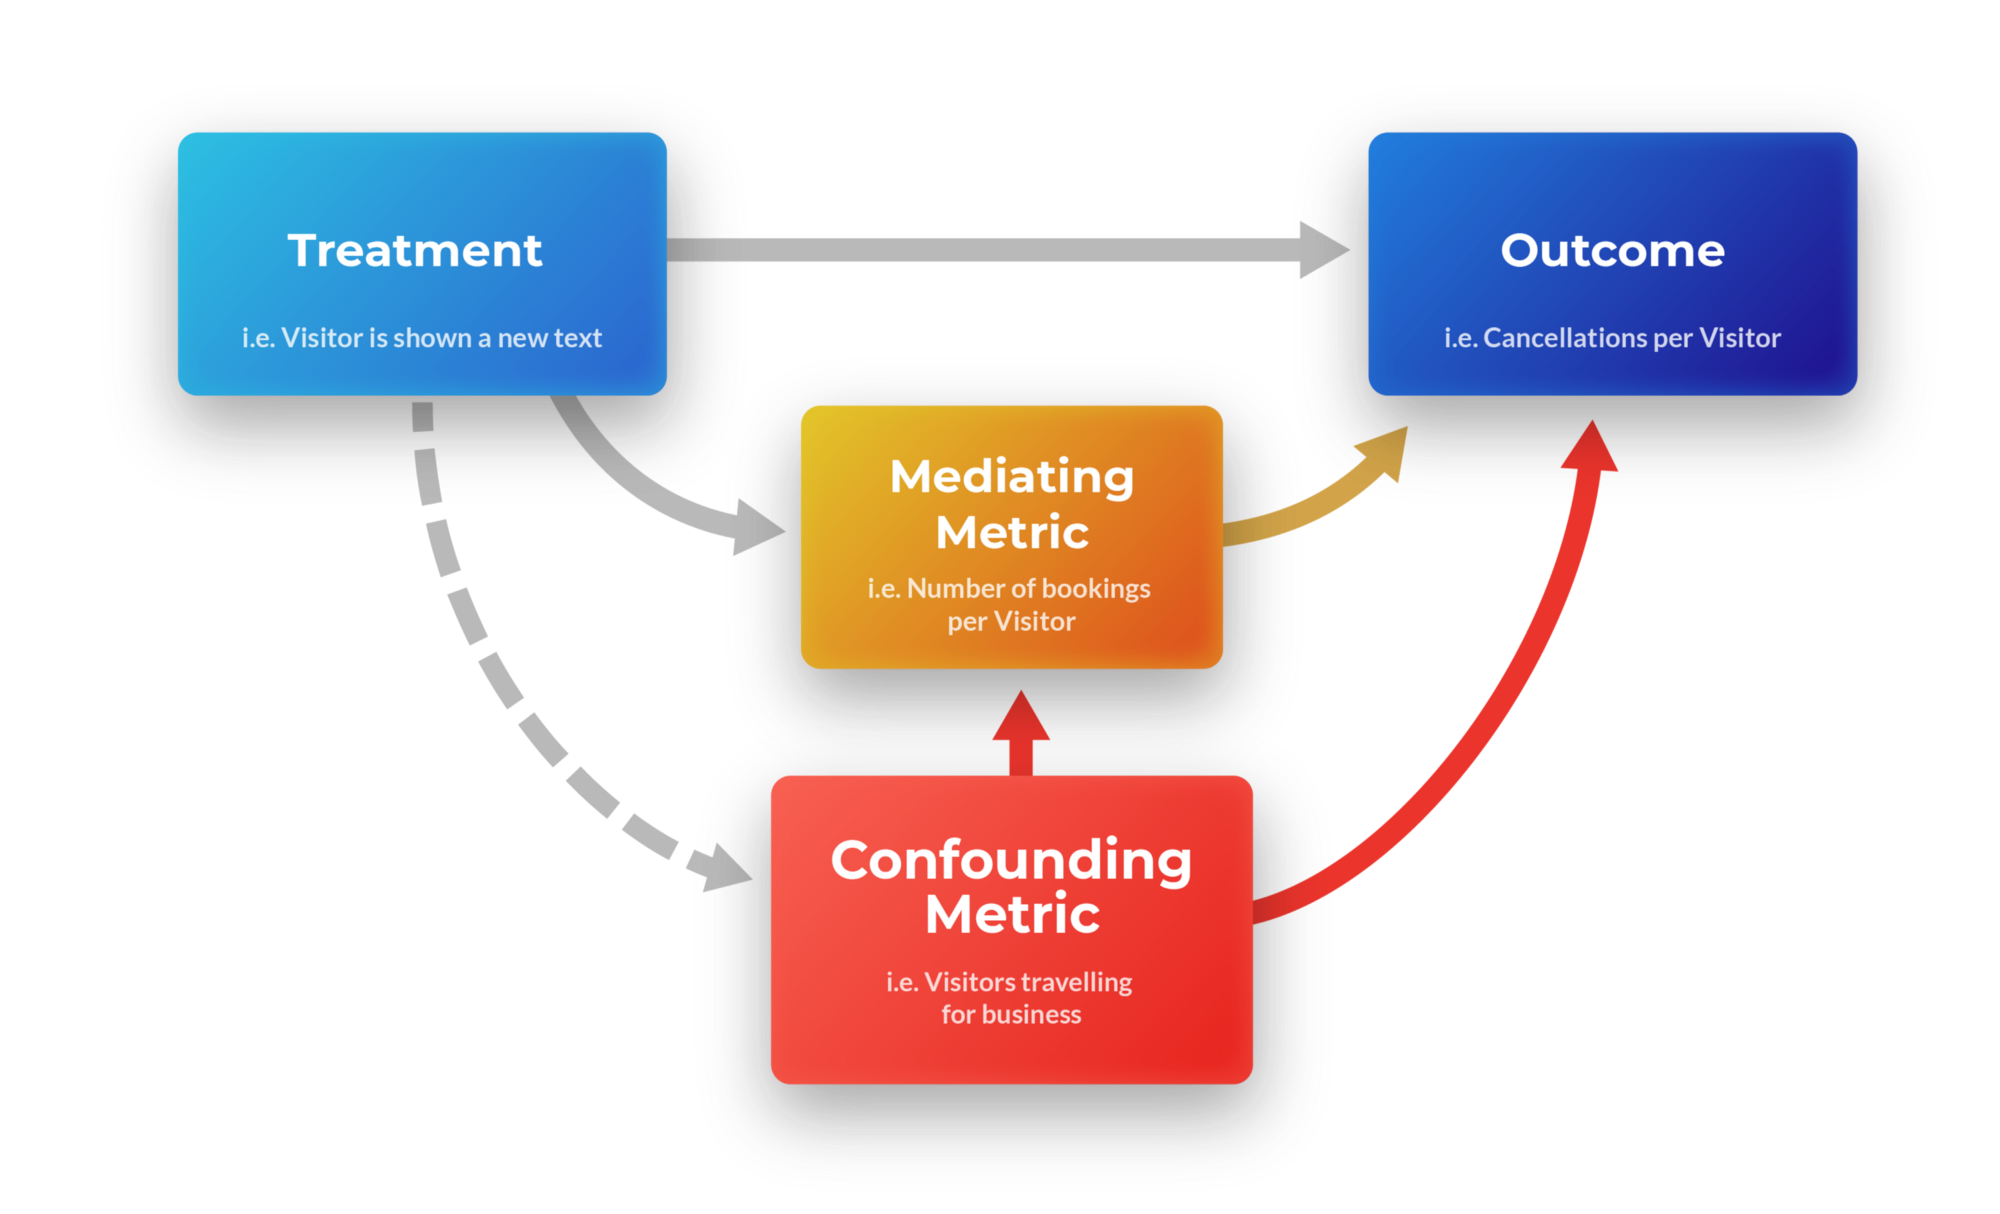 A graphical representation of a treatment affecting an outcome directly, as well as through a mediating metric and a confounder.